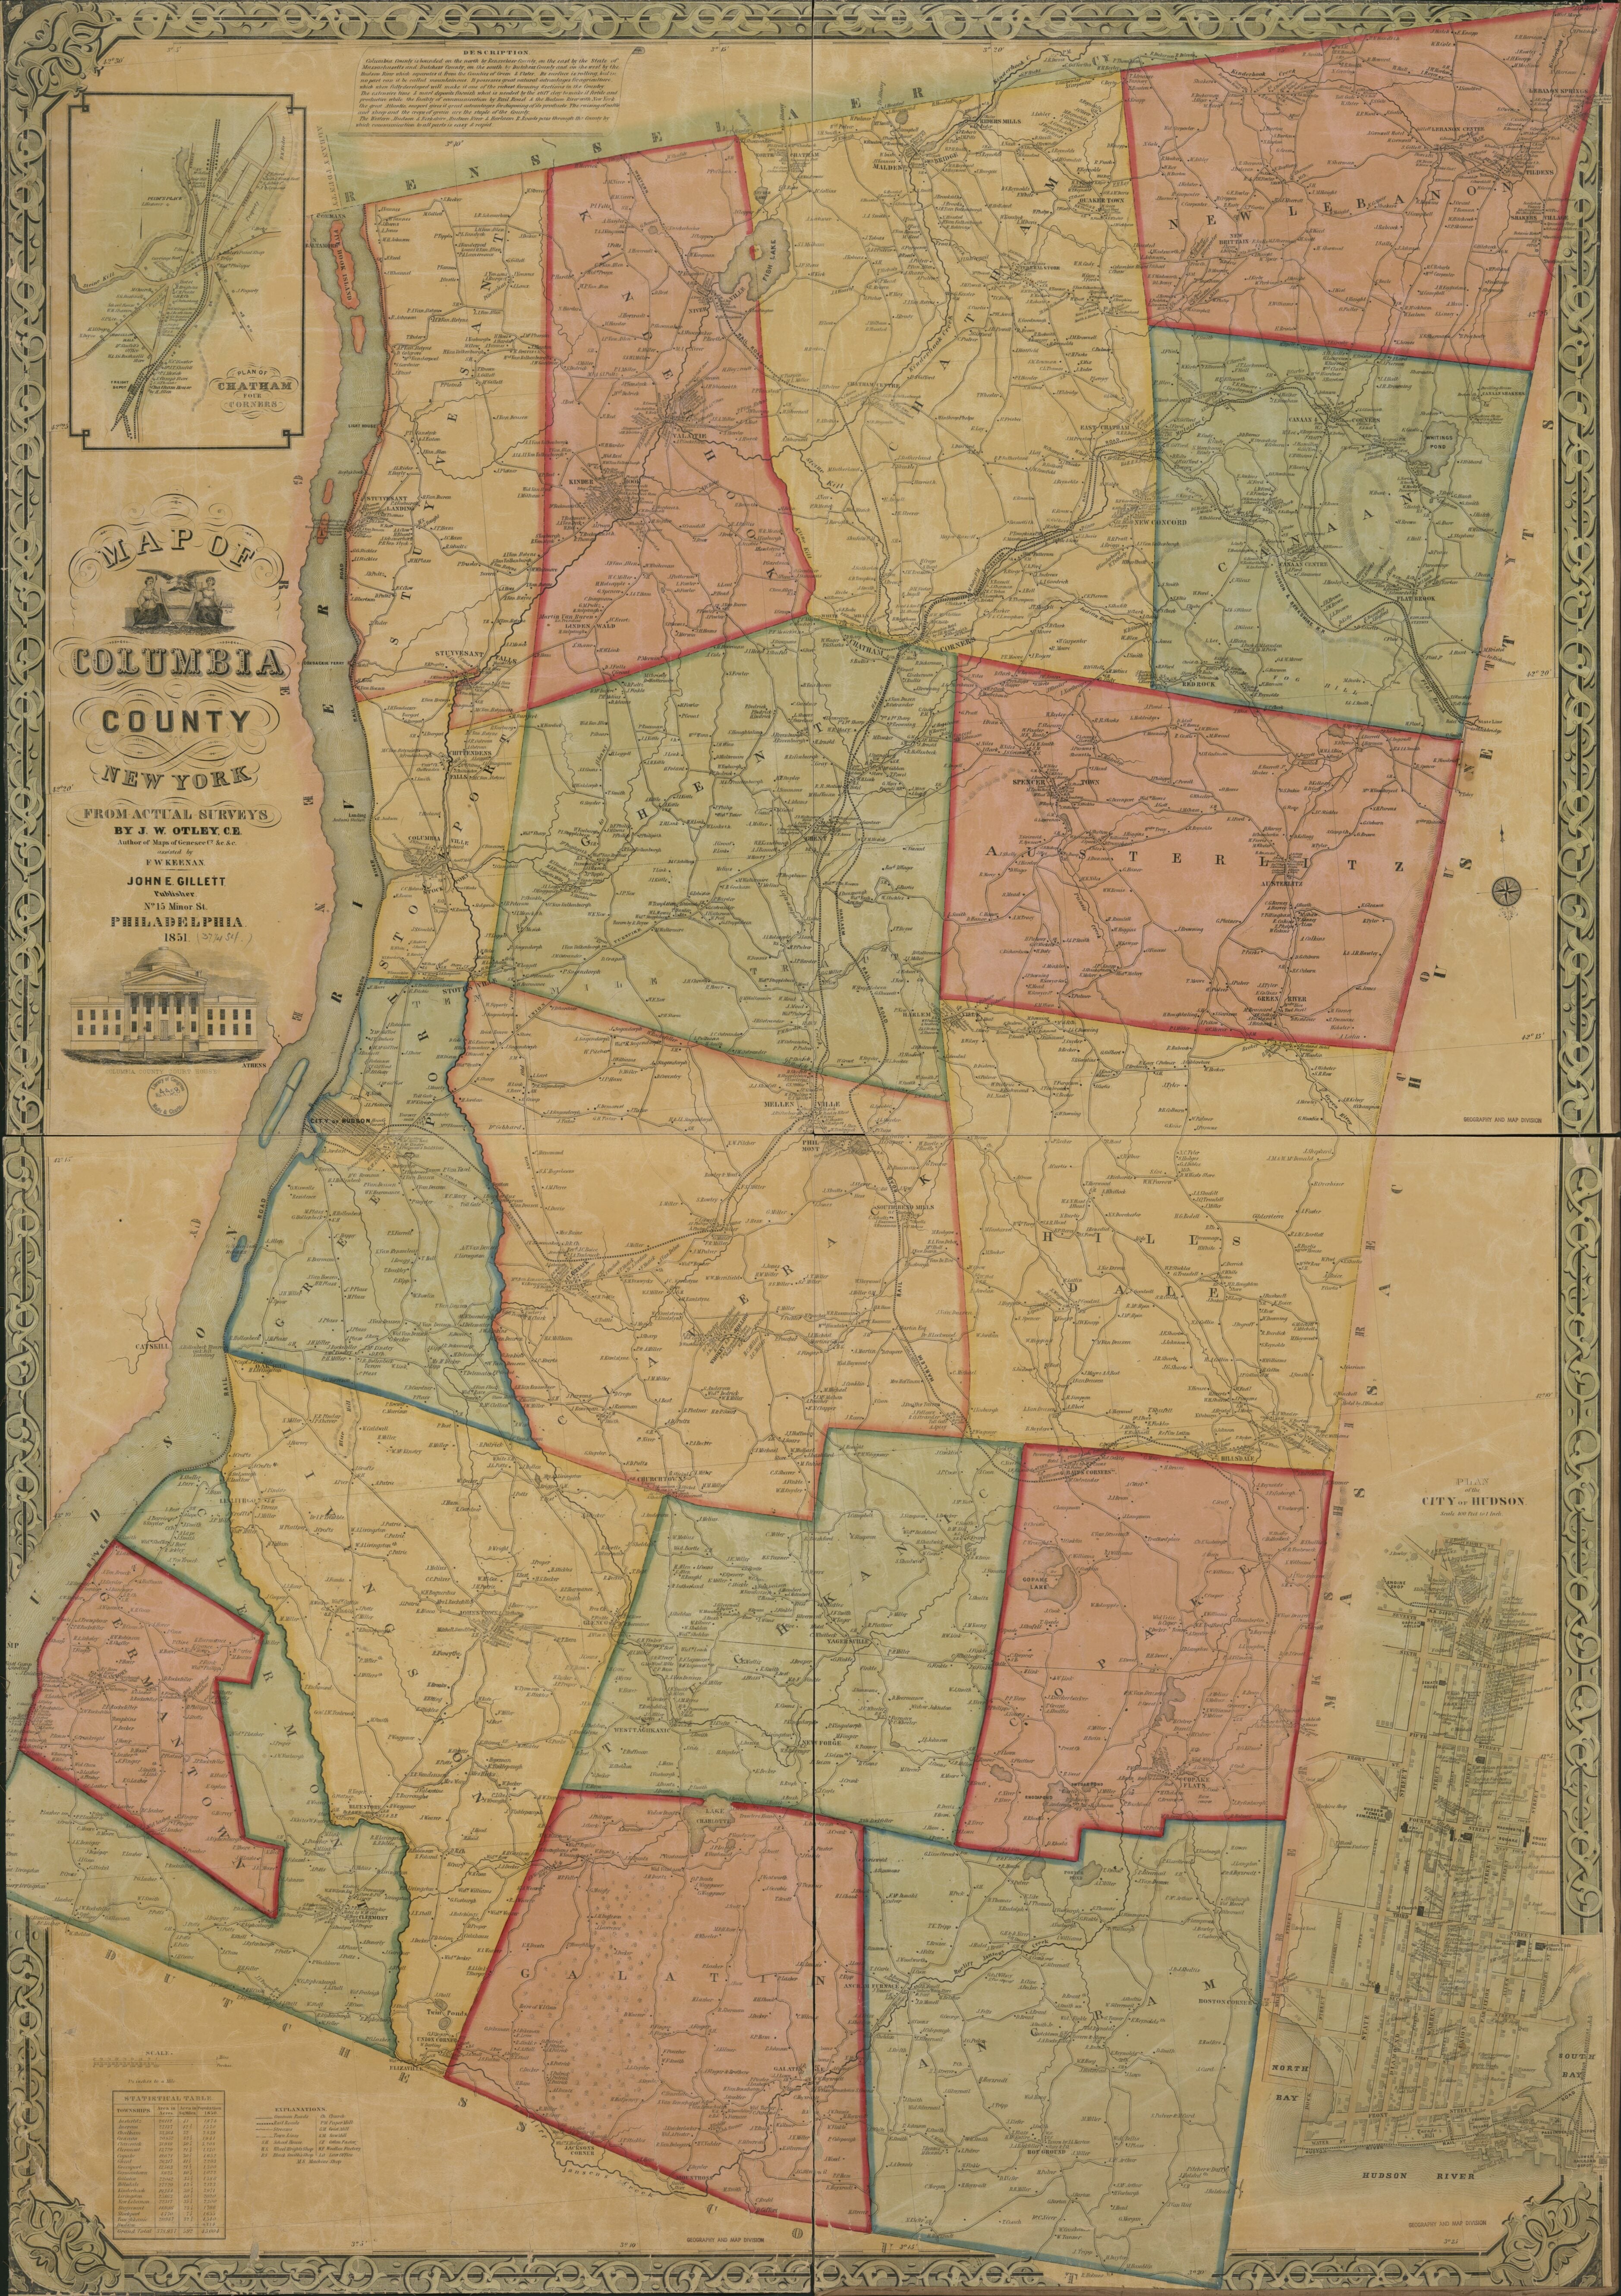 This old map of Map of Columbia County, New York : from Actual Surveys from 1851 was created by J. W. Otley in 1851